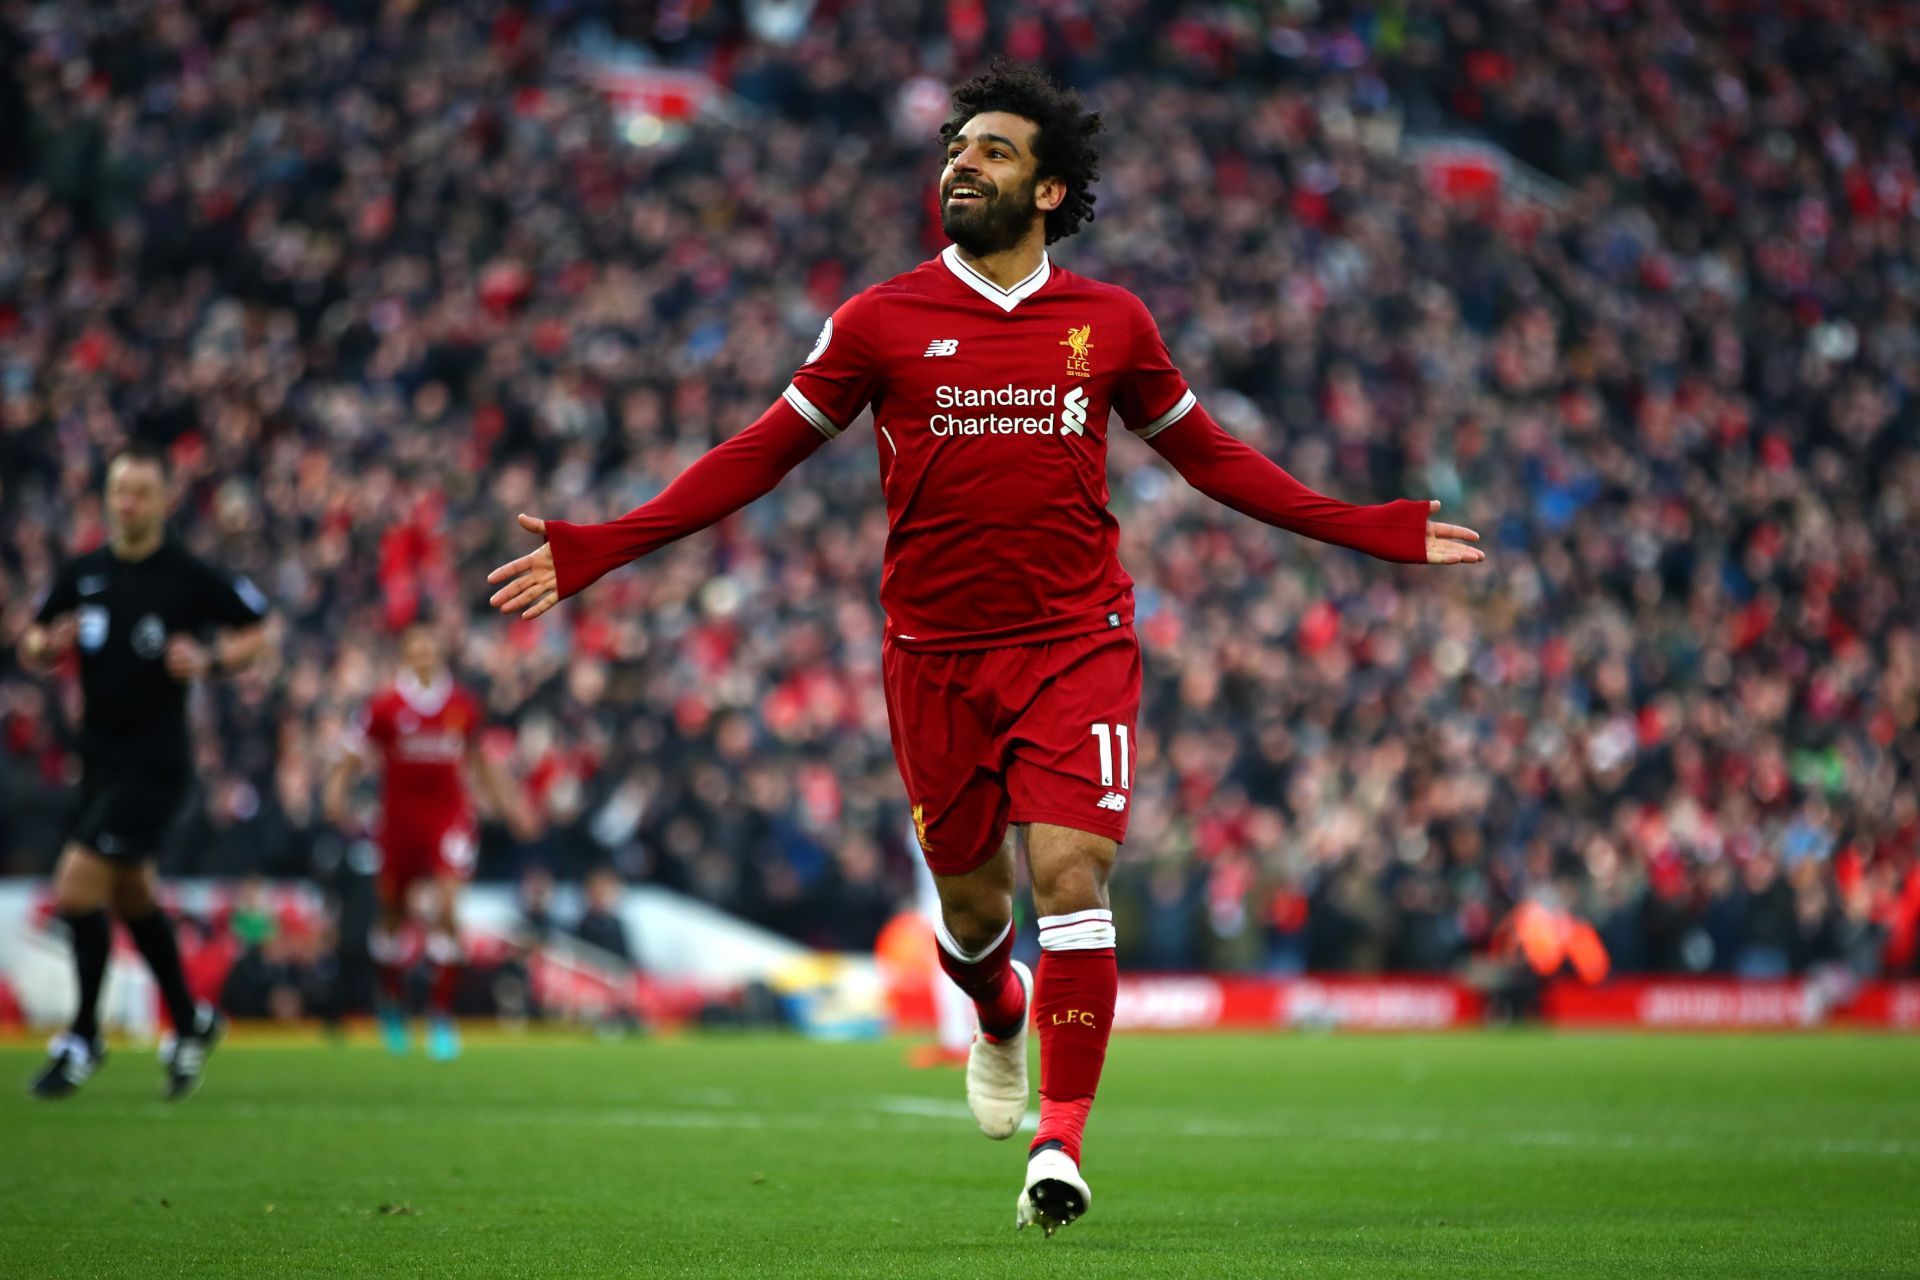 Mohamed Salah recently signed a new contract with the Reds